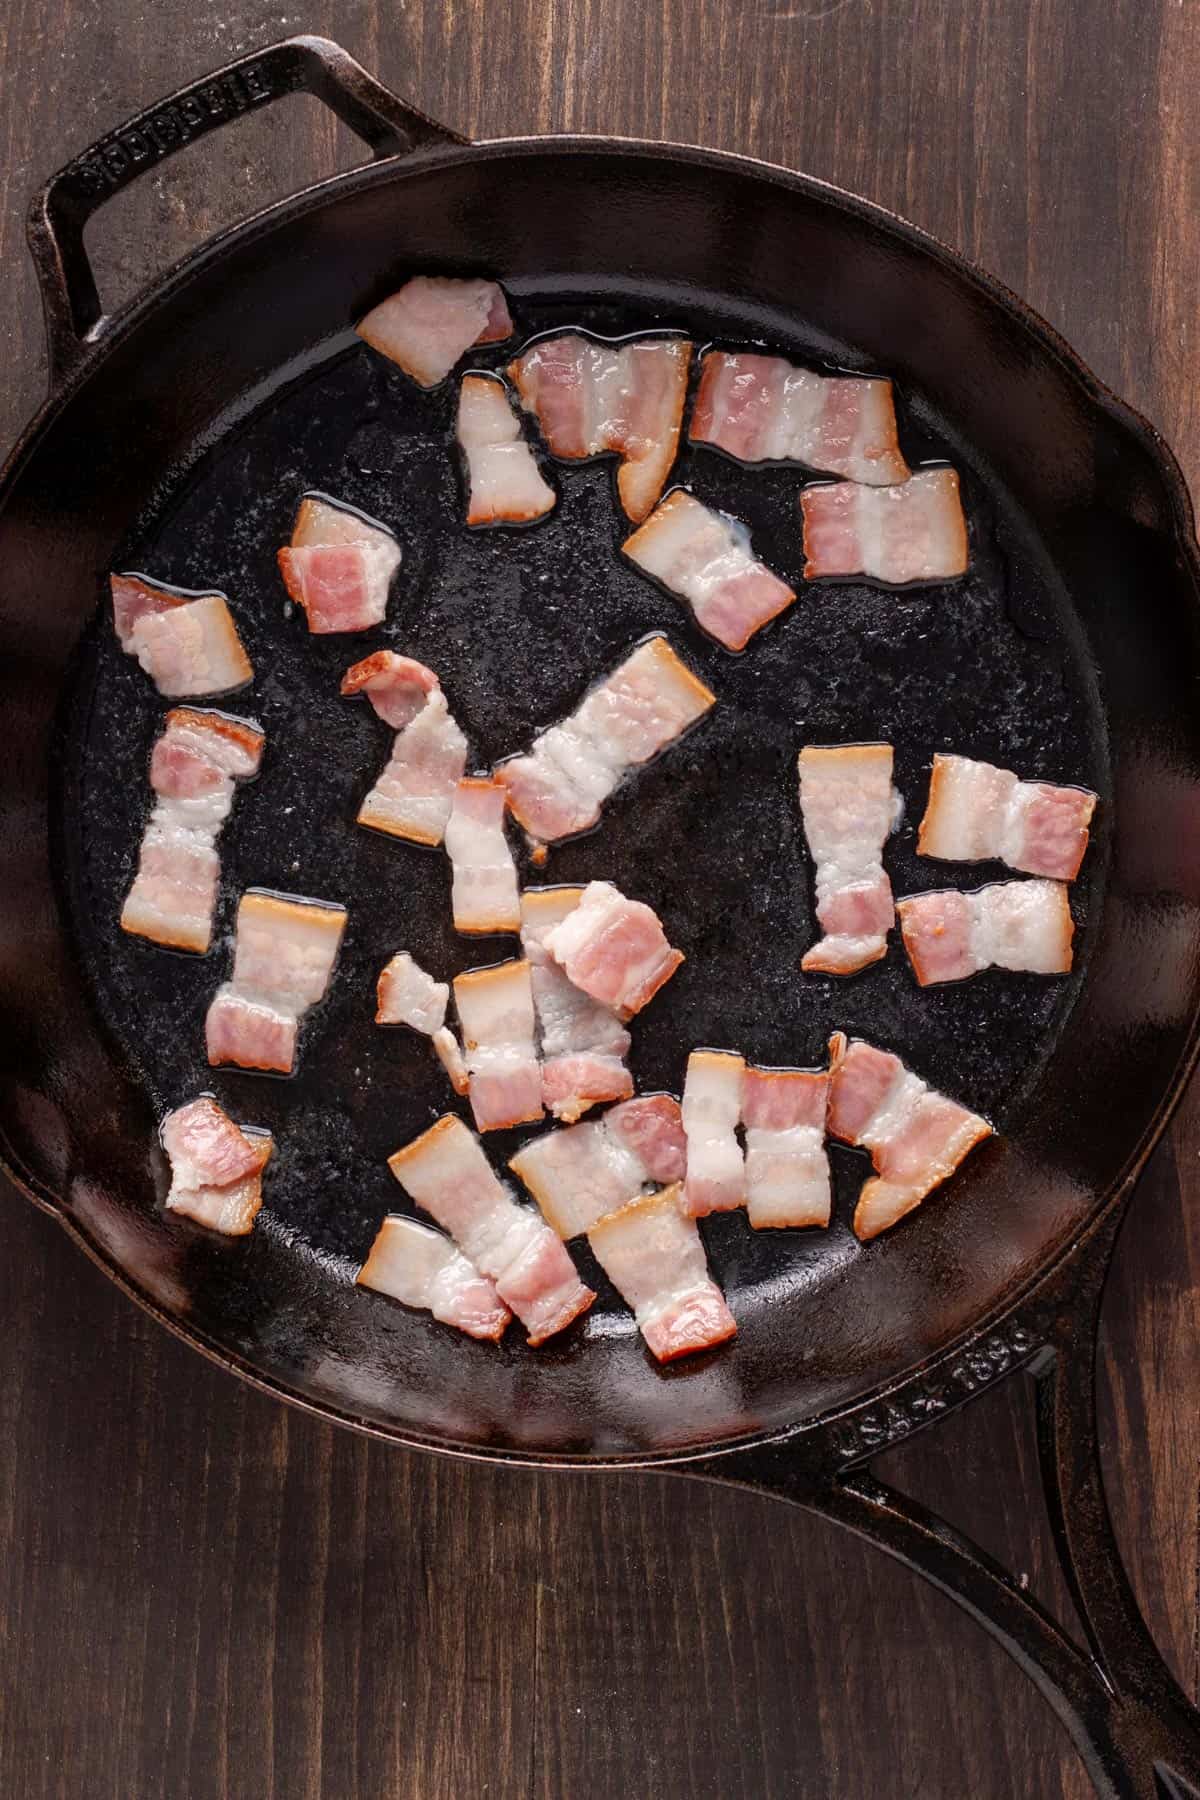 Chopped bacon in a cast iron skillet ready to get cooked.